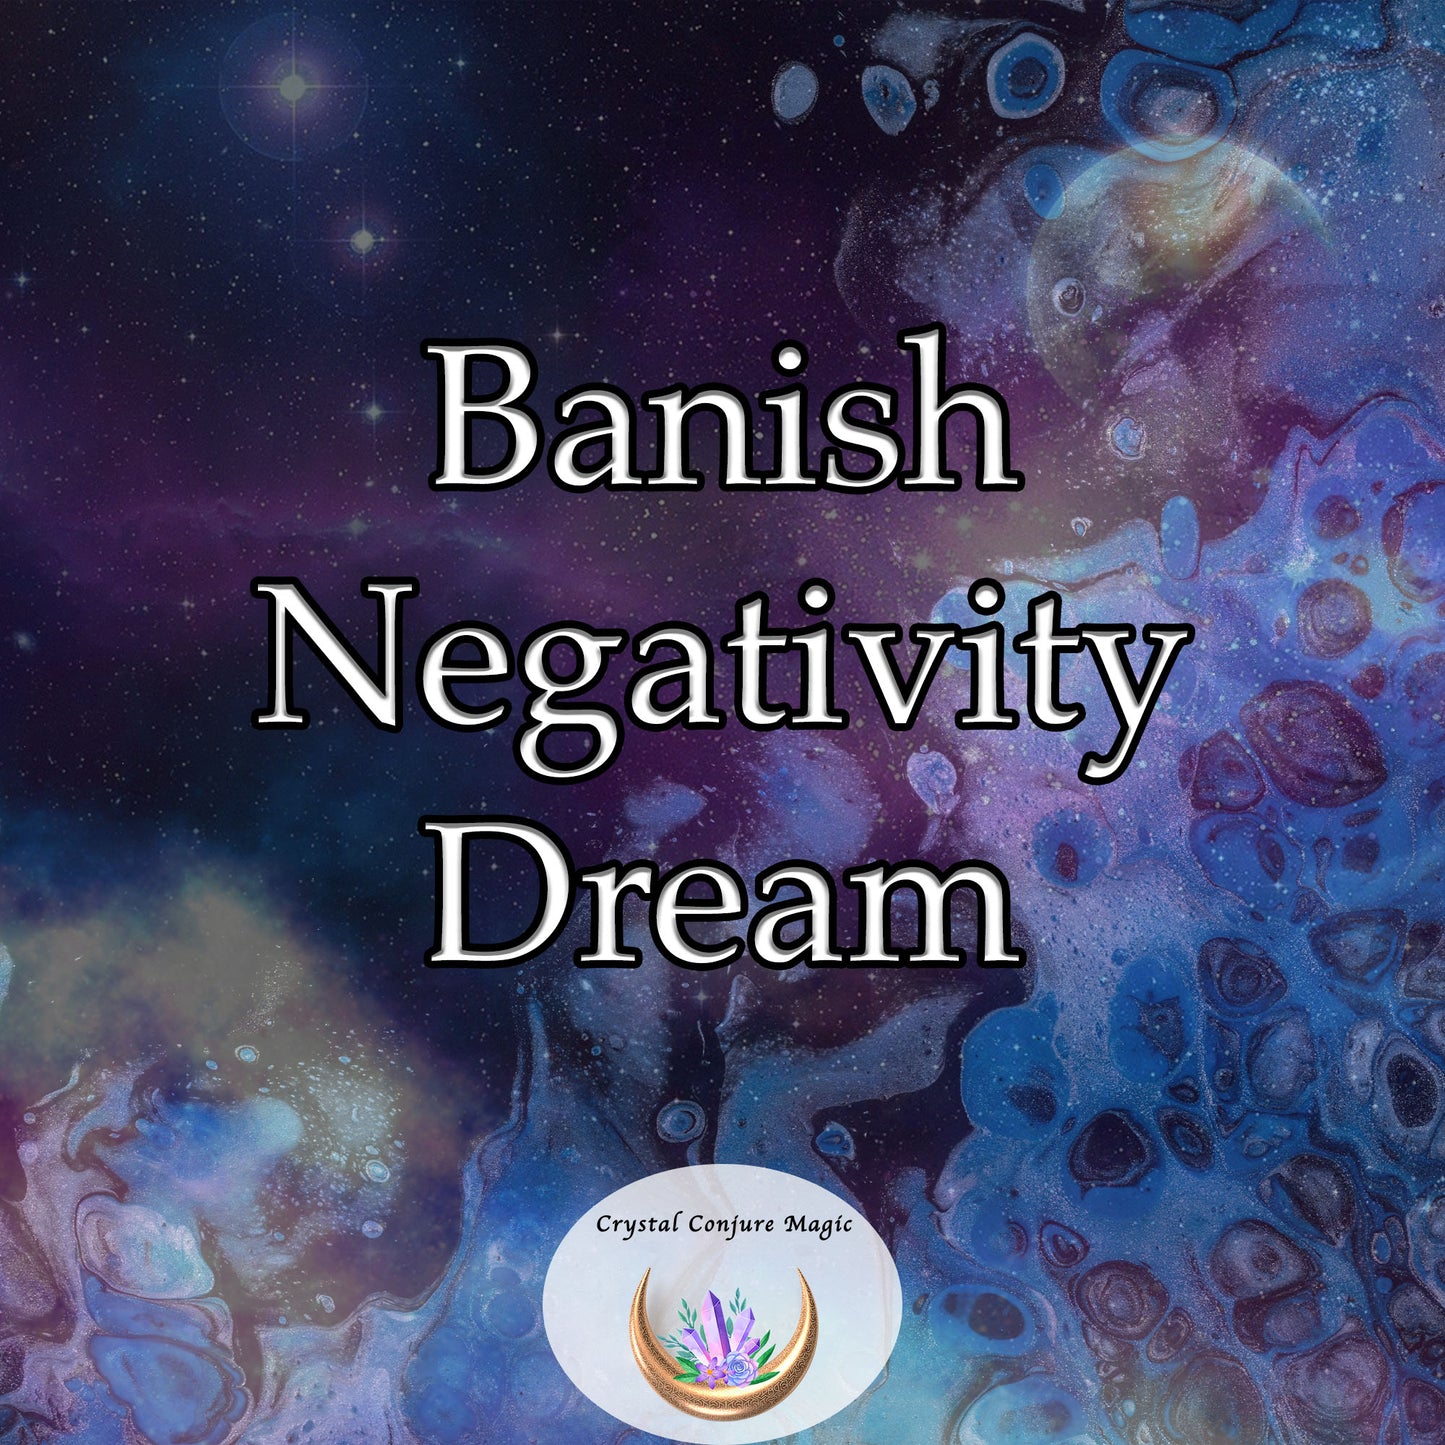 Banish Negativity Dream - cleanse your life of unwanted negativity, revel in the positive energy - cleanse your life of unwanted negativity, revel in the positive energy